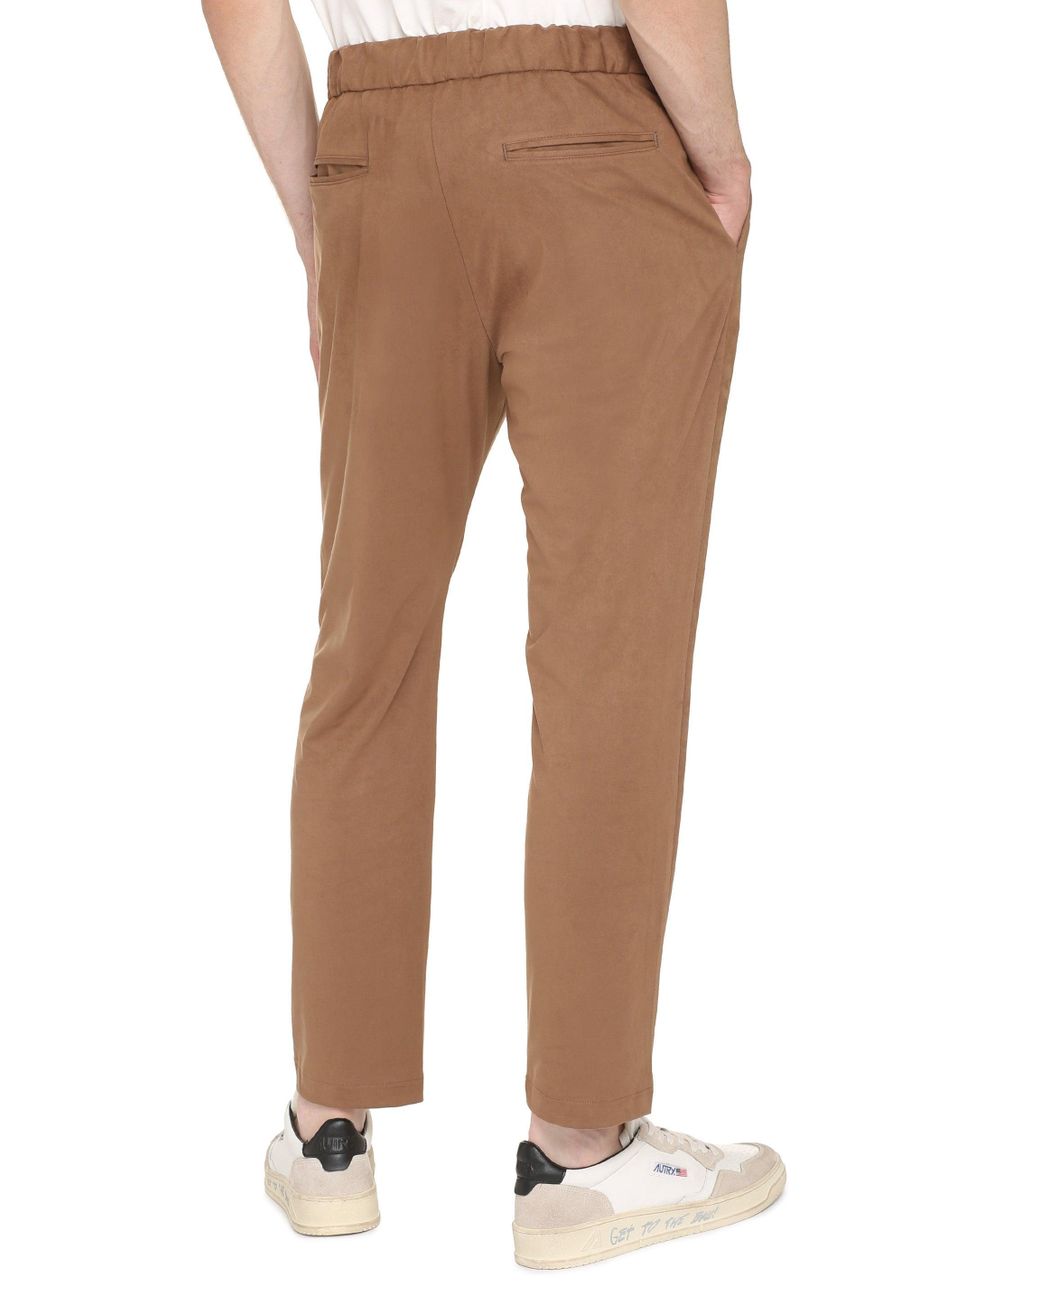 Save 22% Mens Trousers Herno Eco-suede Trousers for Men Slacks and Chinos Herno Trousers Slacks and Chinos 